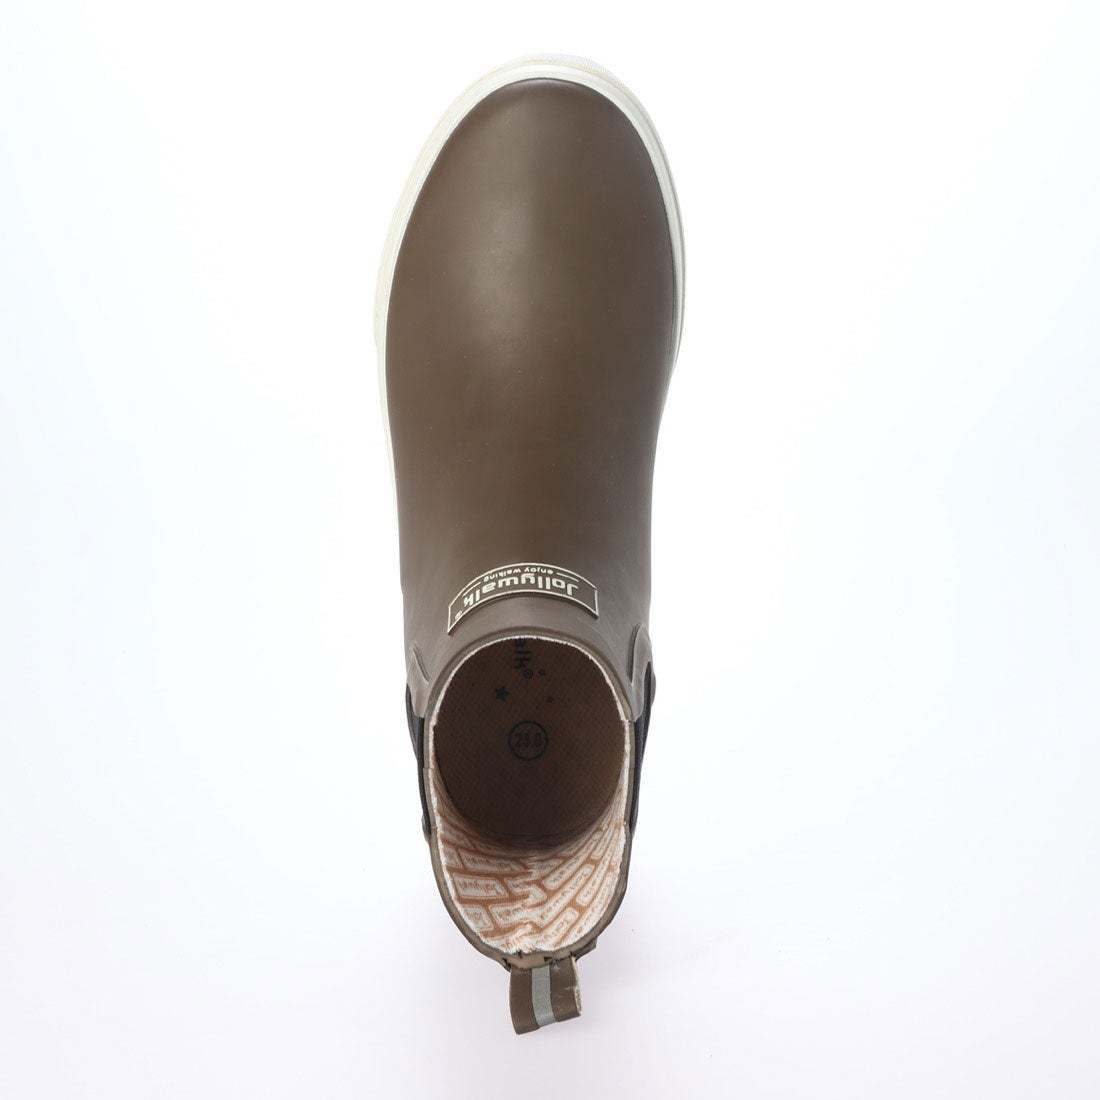  men's rain boots rain shoes boots rain shoes natural rubber material new goods [20088-BRN-275]27.5cm stock one . sale 